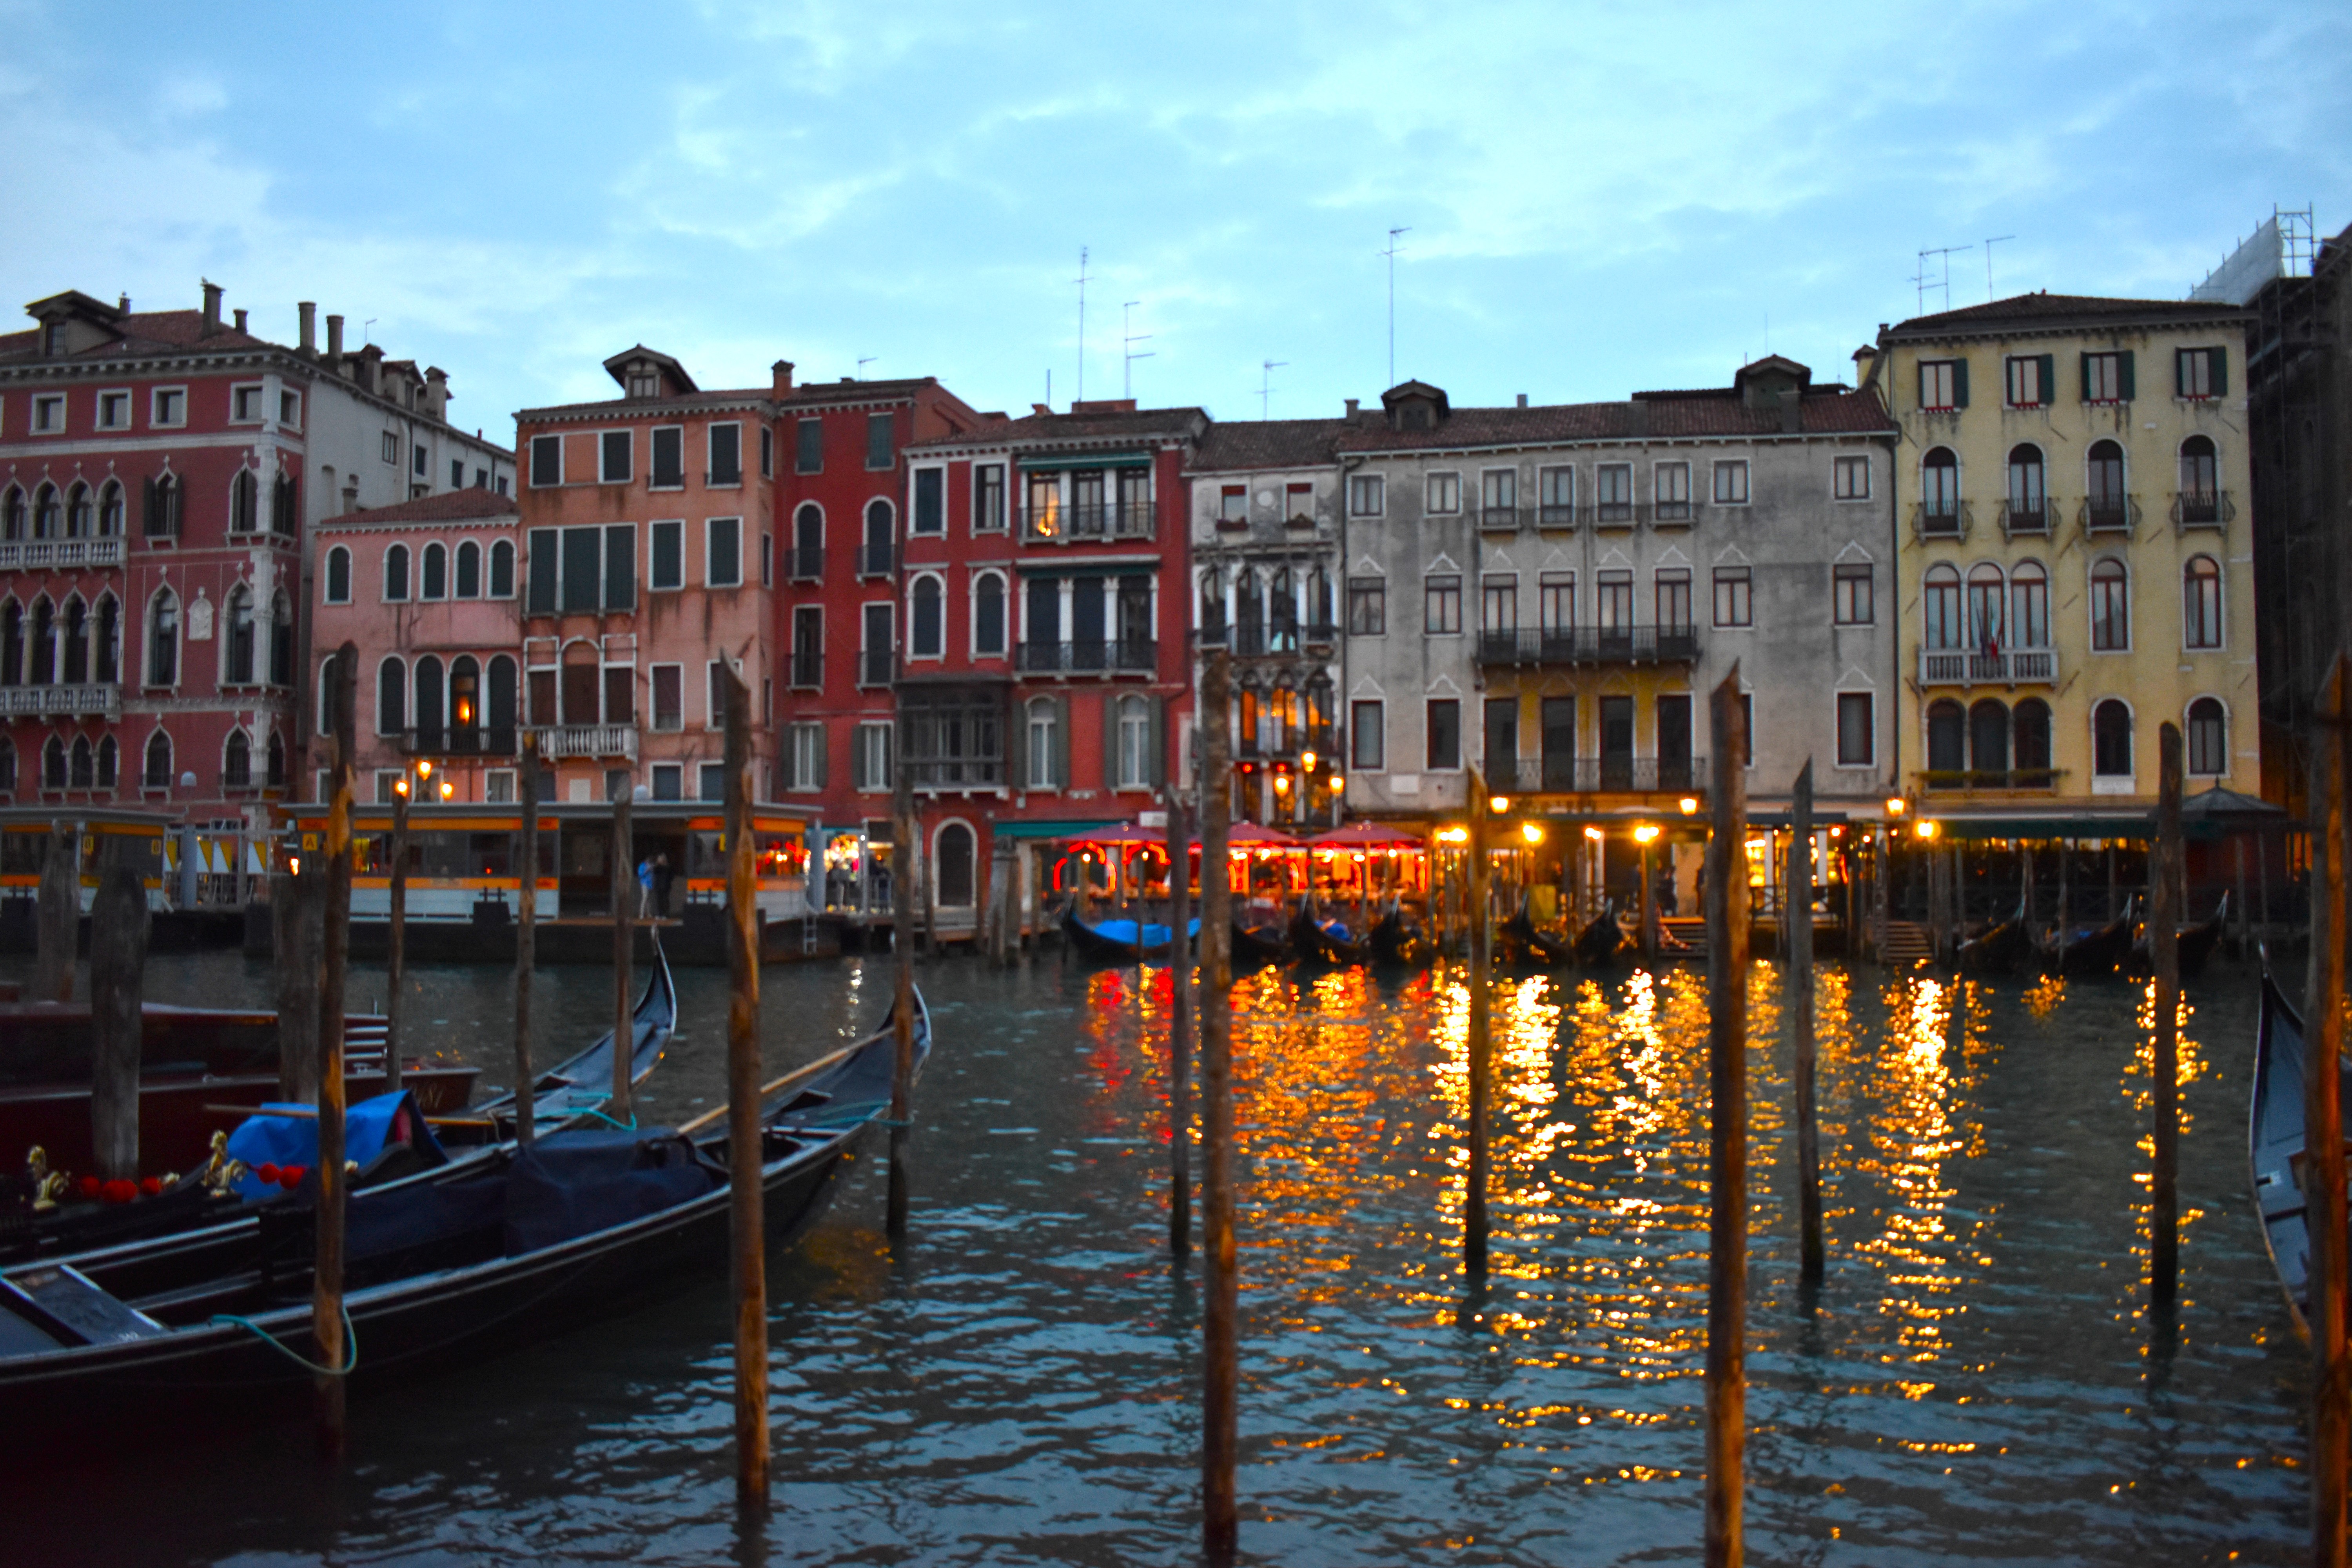 Lights on a canal in Venice